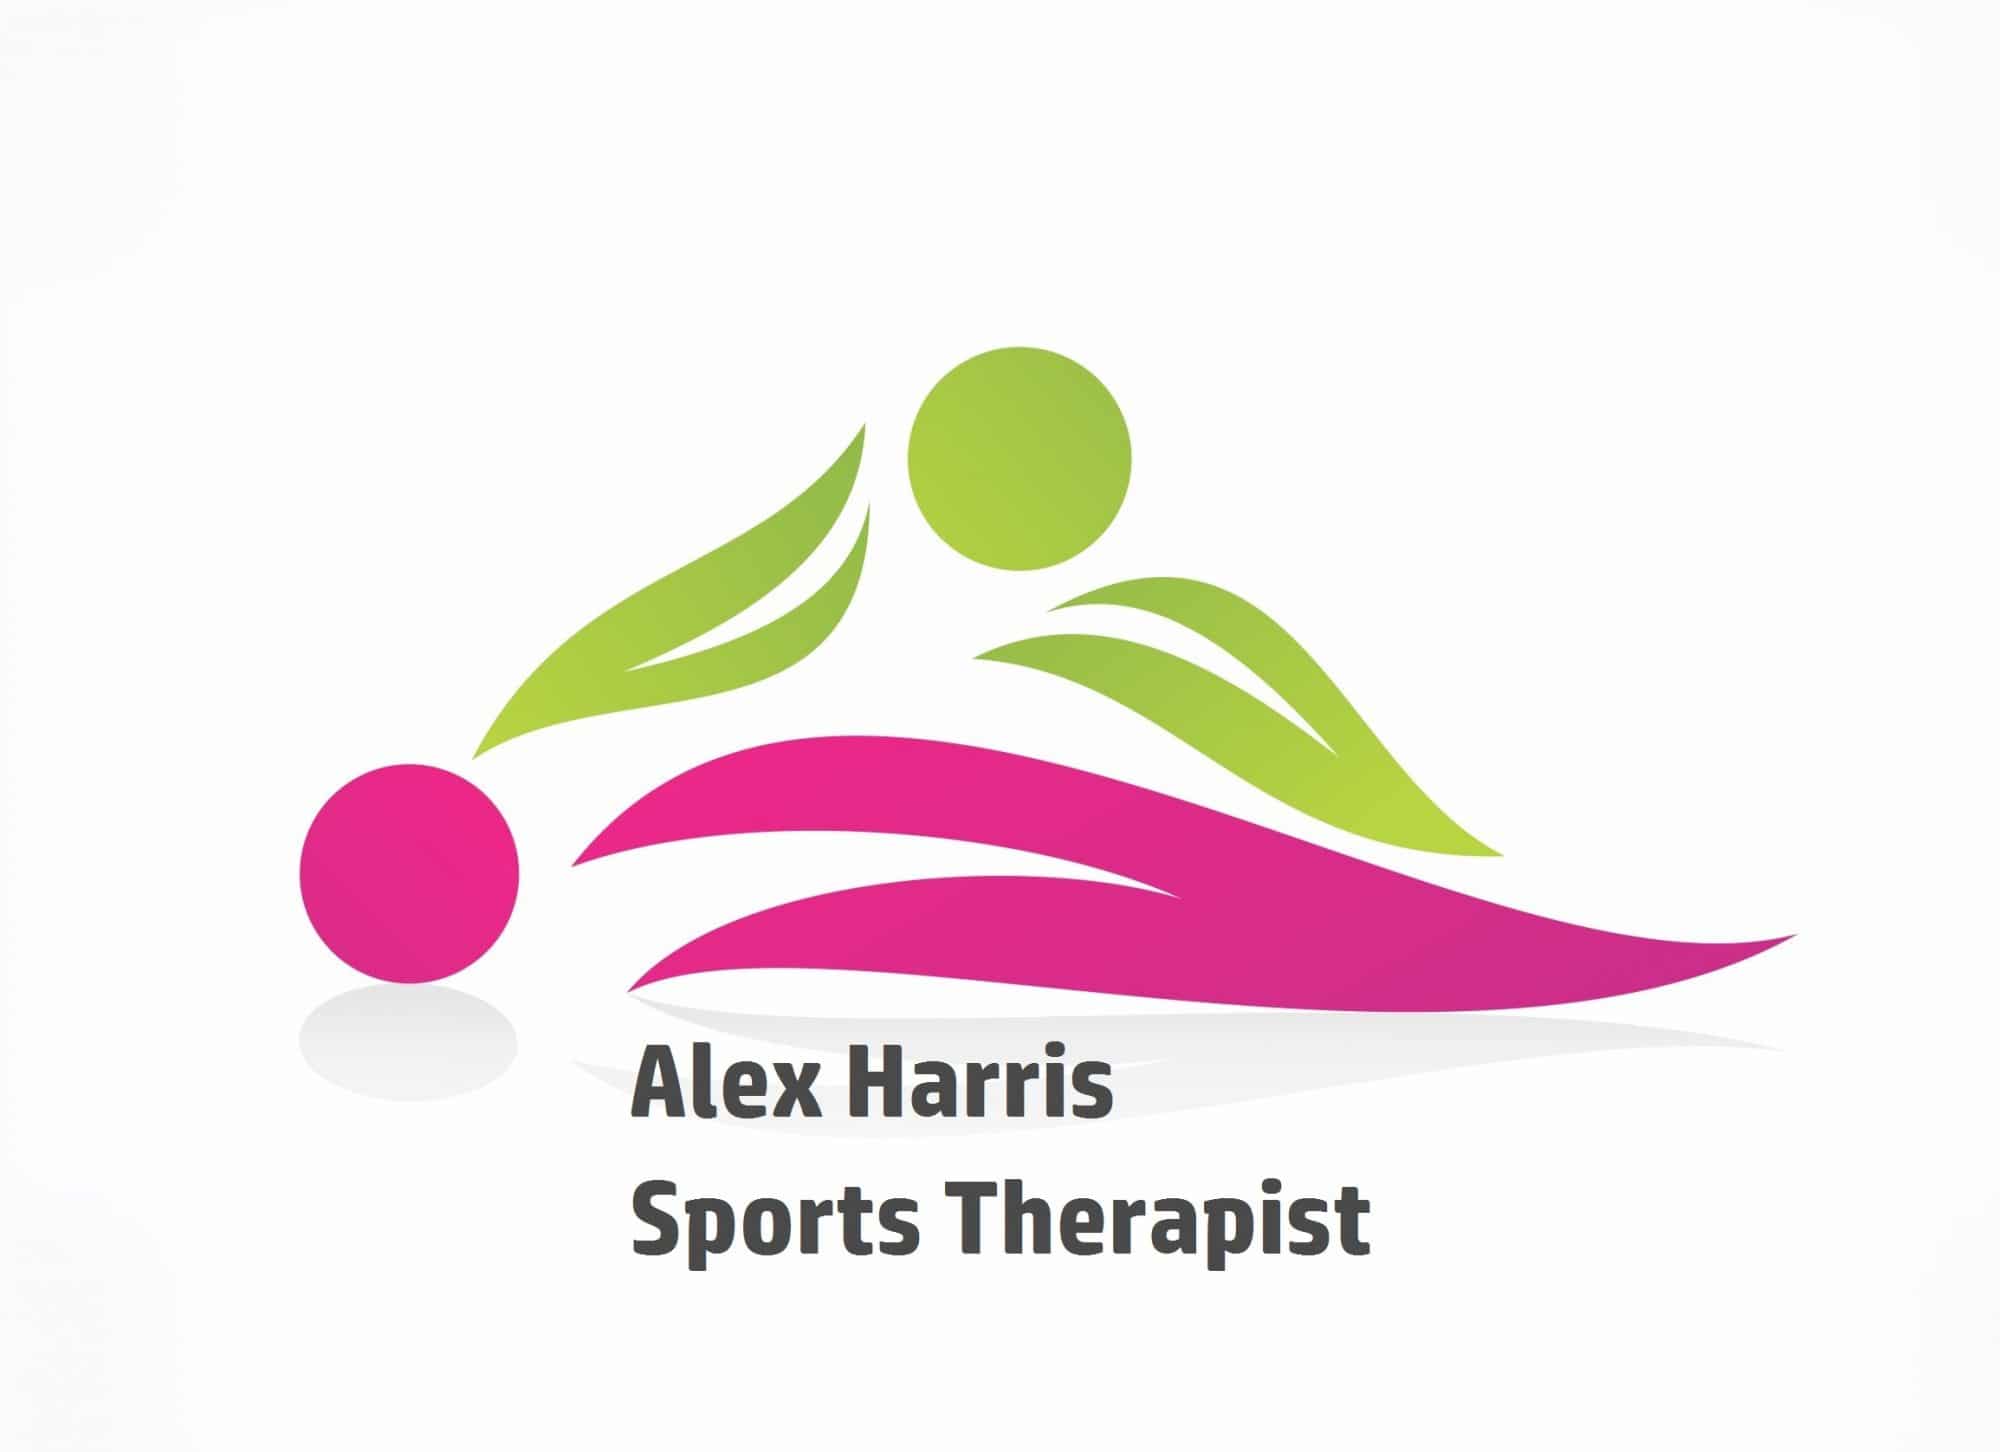 massages clipart athletic therapist